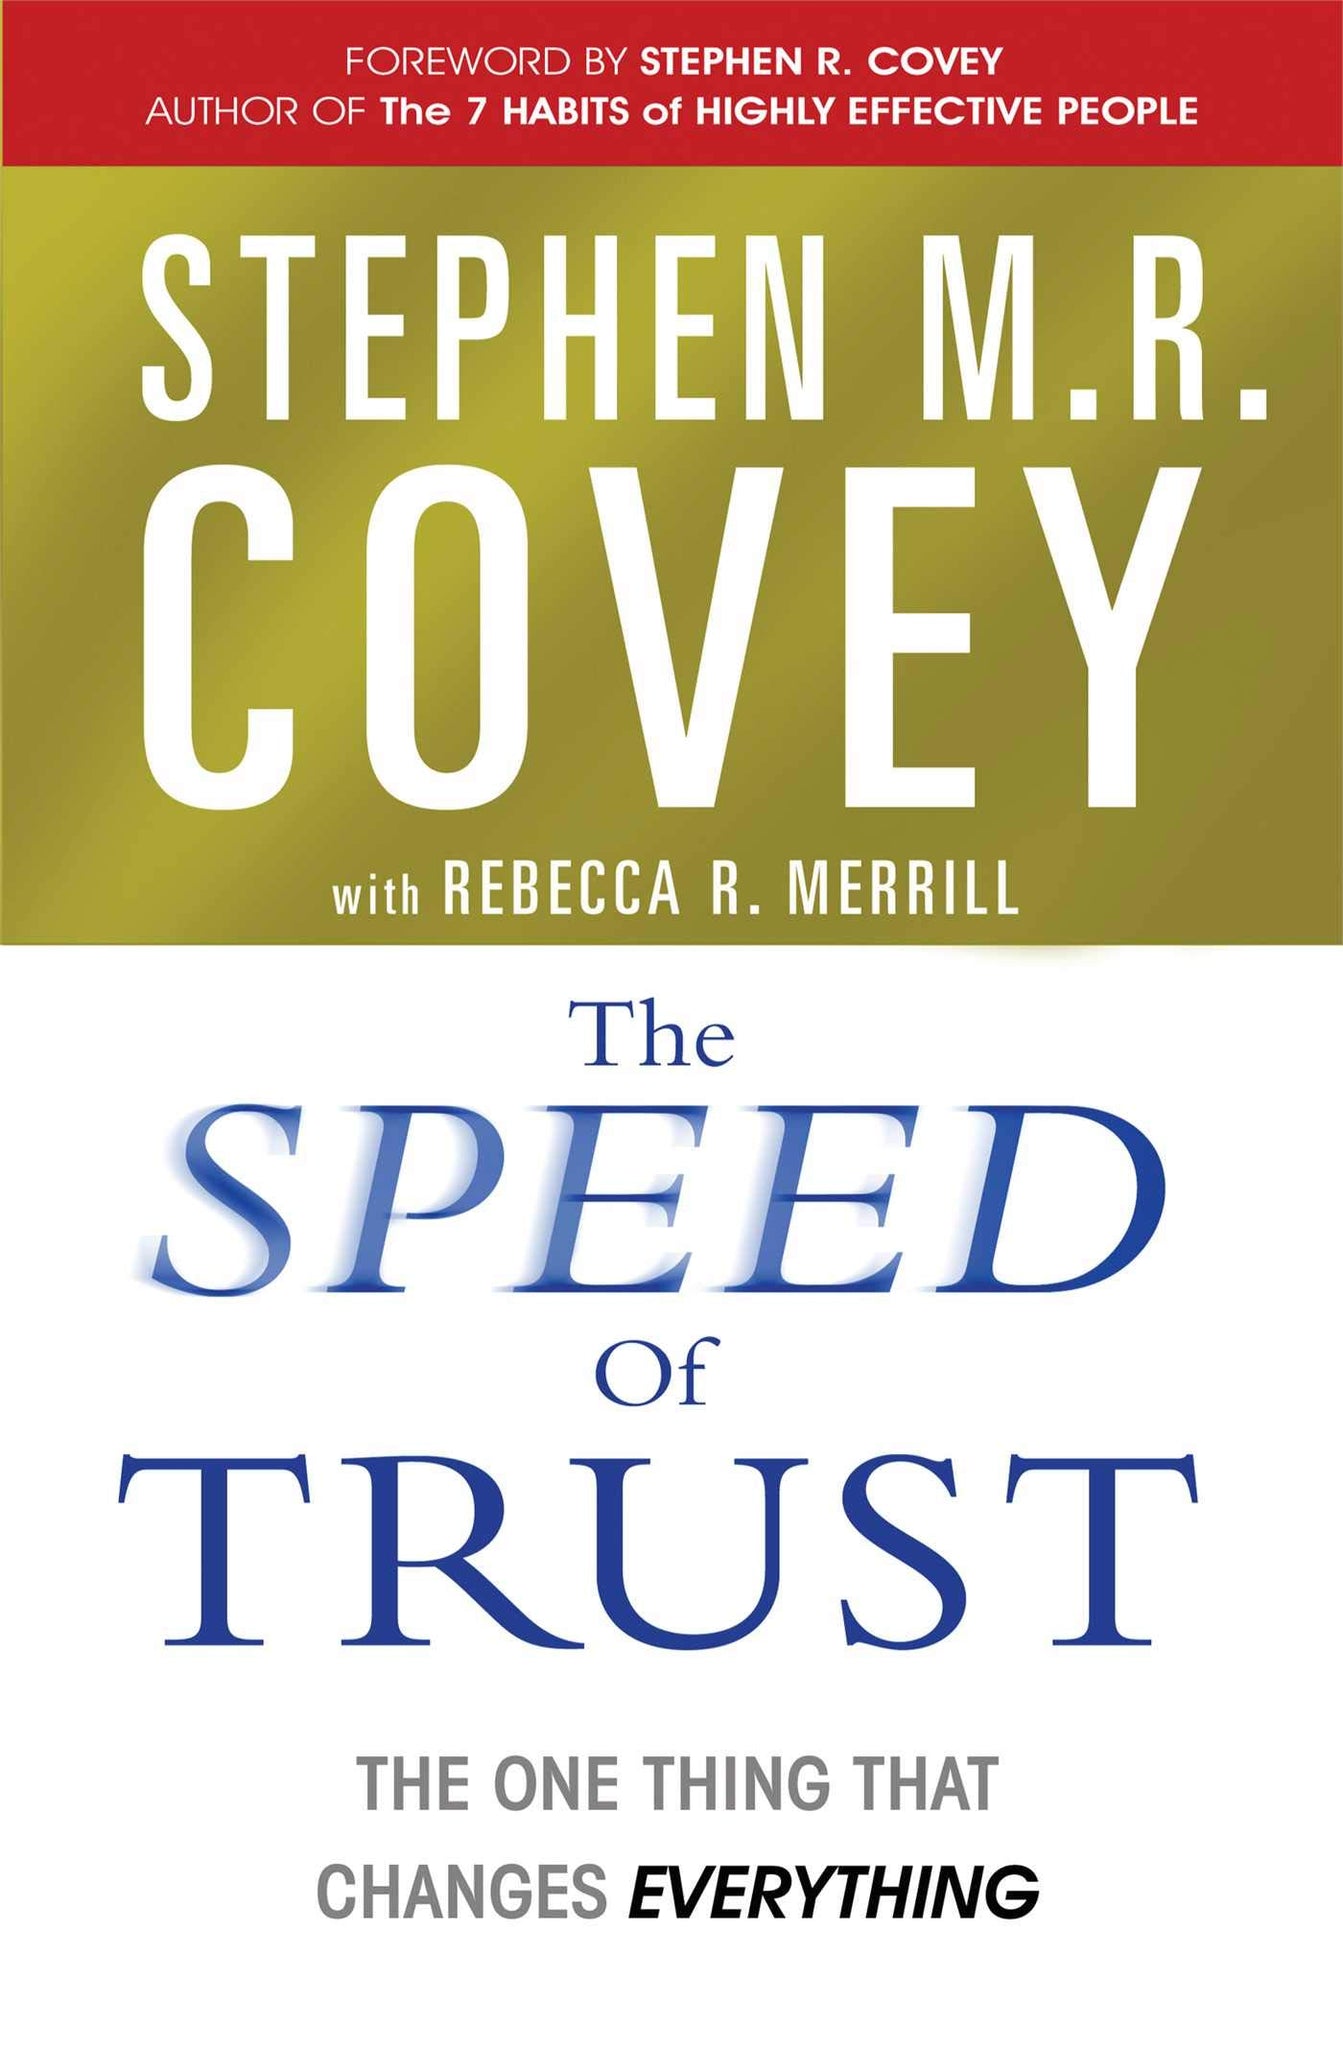 The Speed of Trust: The One Thing that Changes Everything by Stephen R. Covey